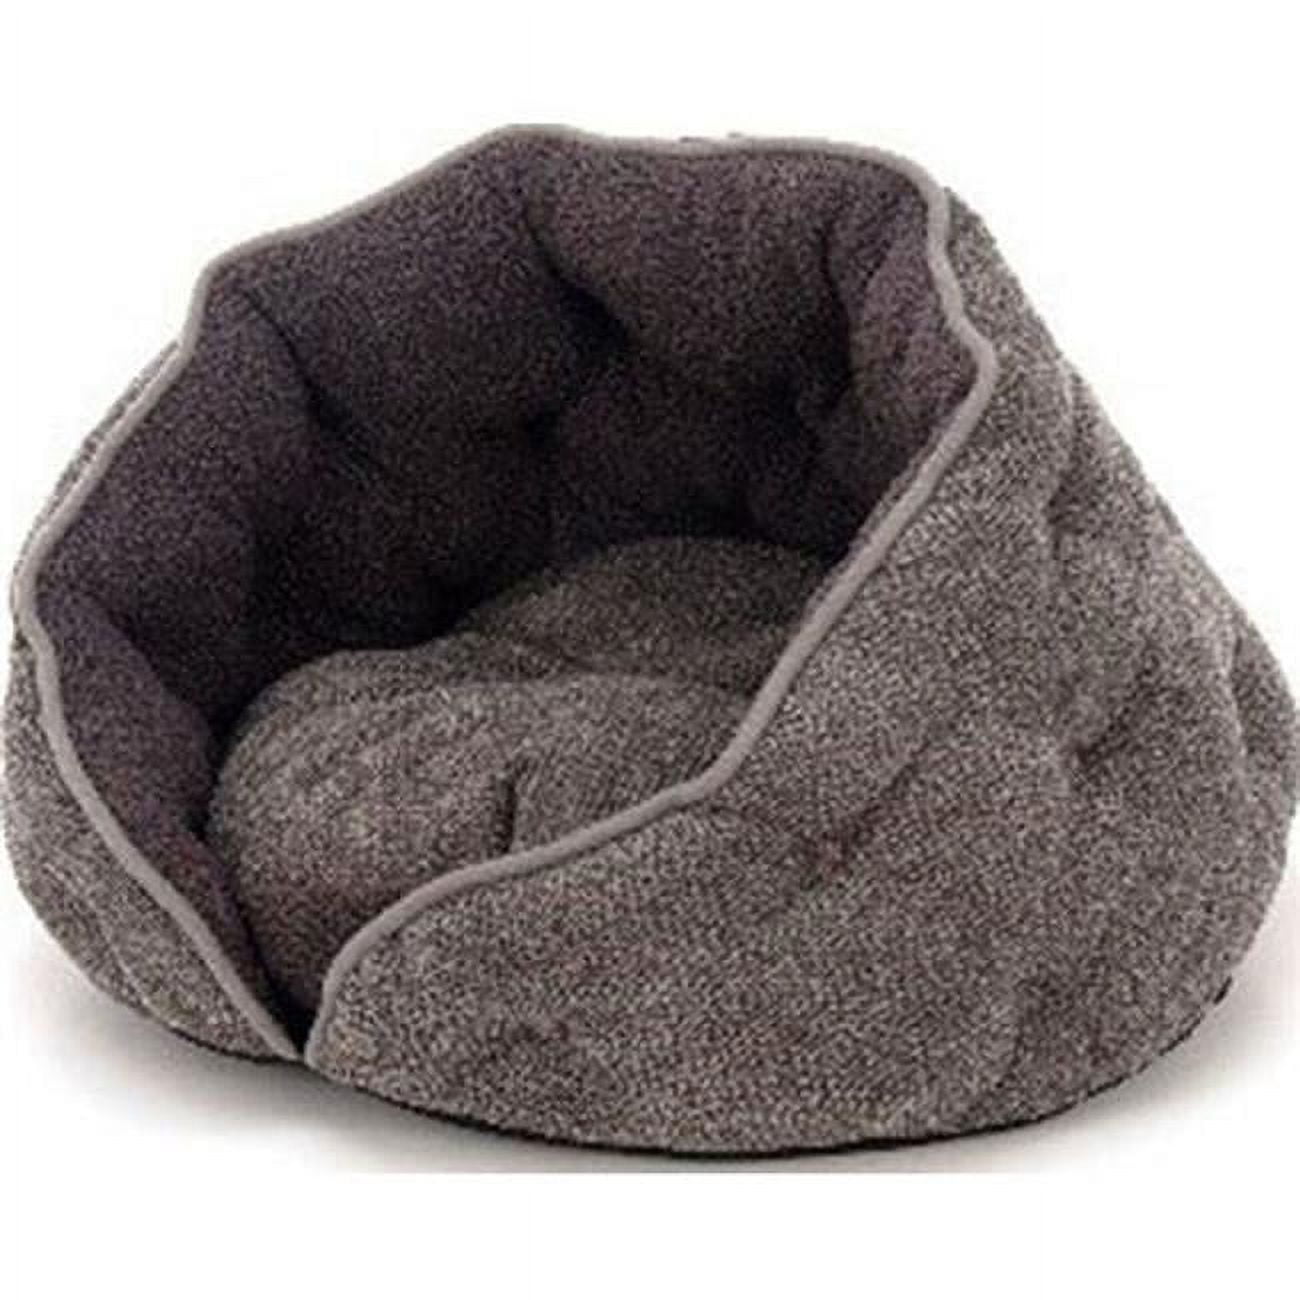 Picture of Ware Manufacturing 10268 18 x 18 x 12.25 in. Cuddle Pet Bed